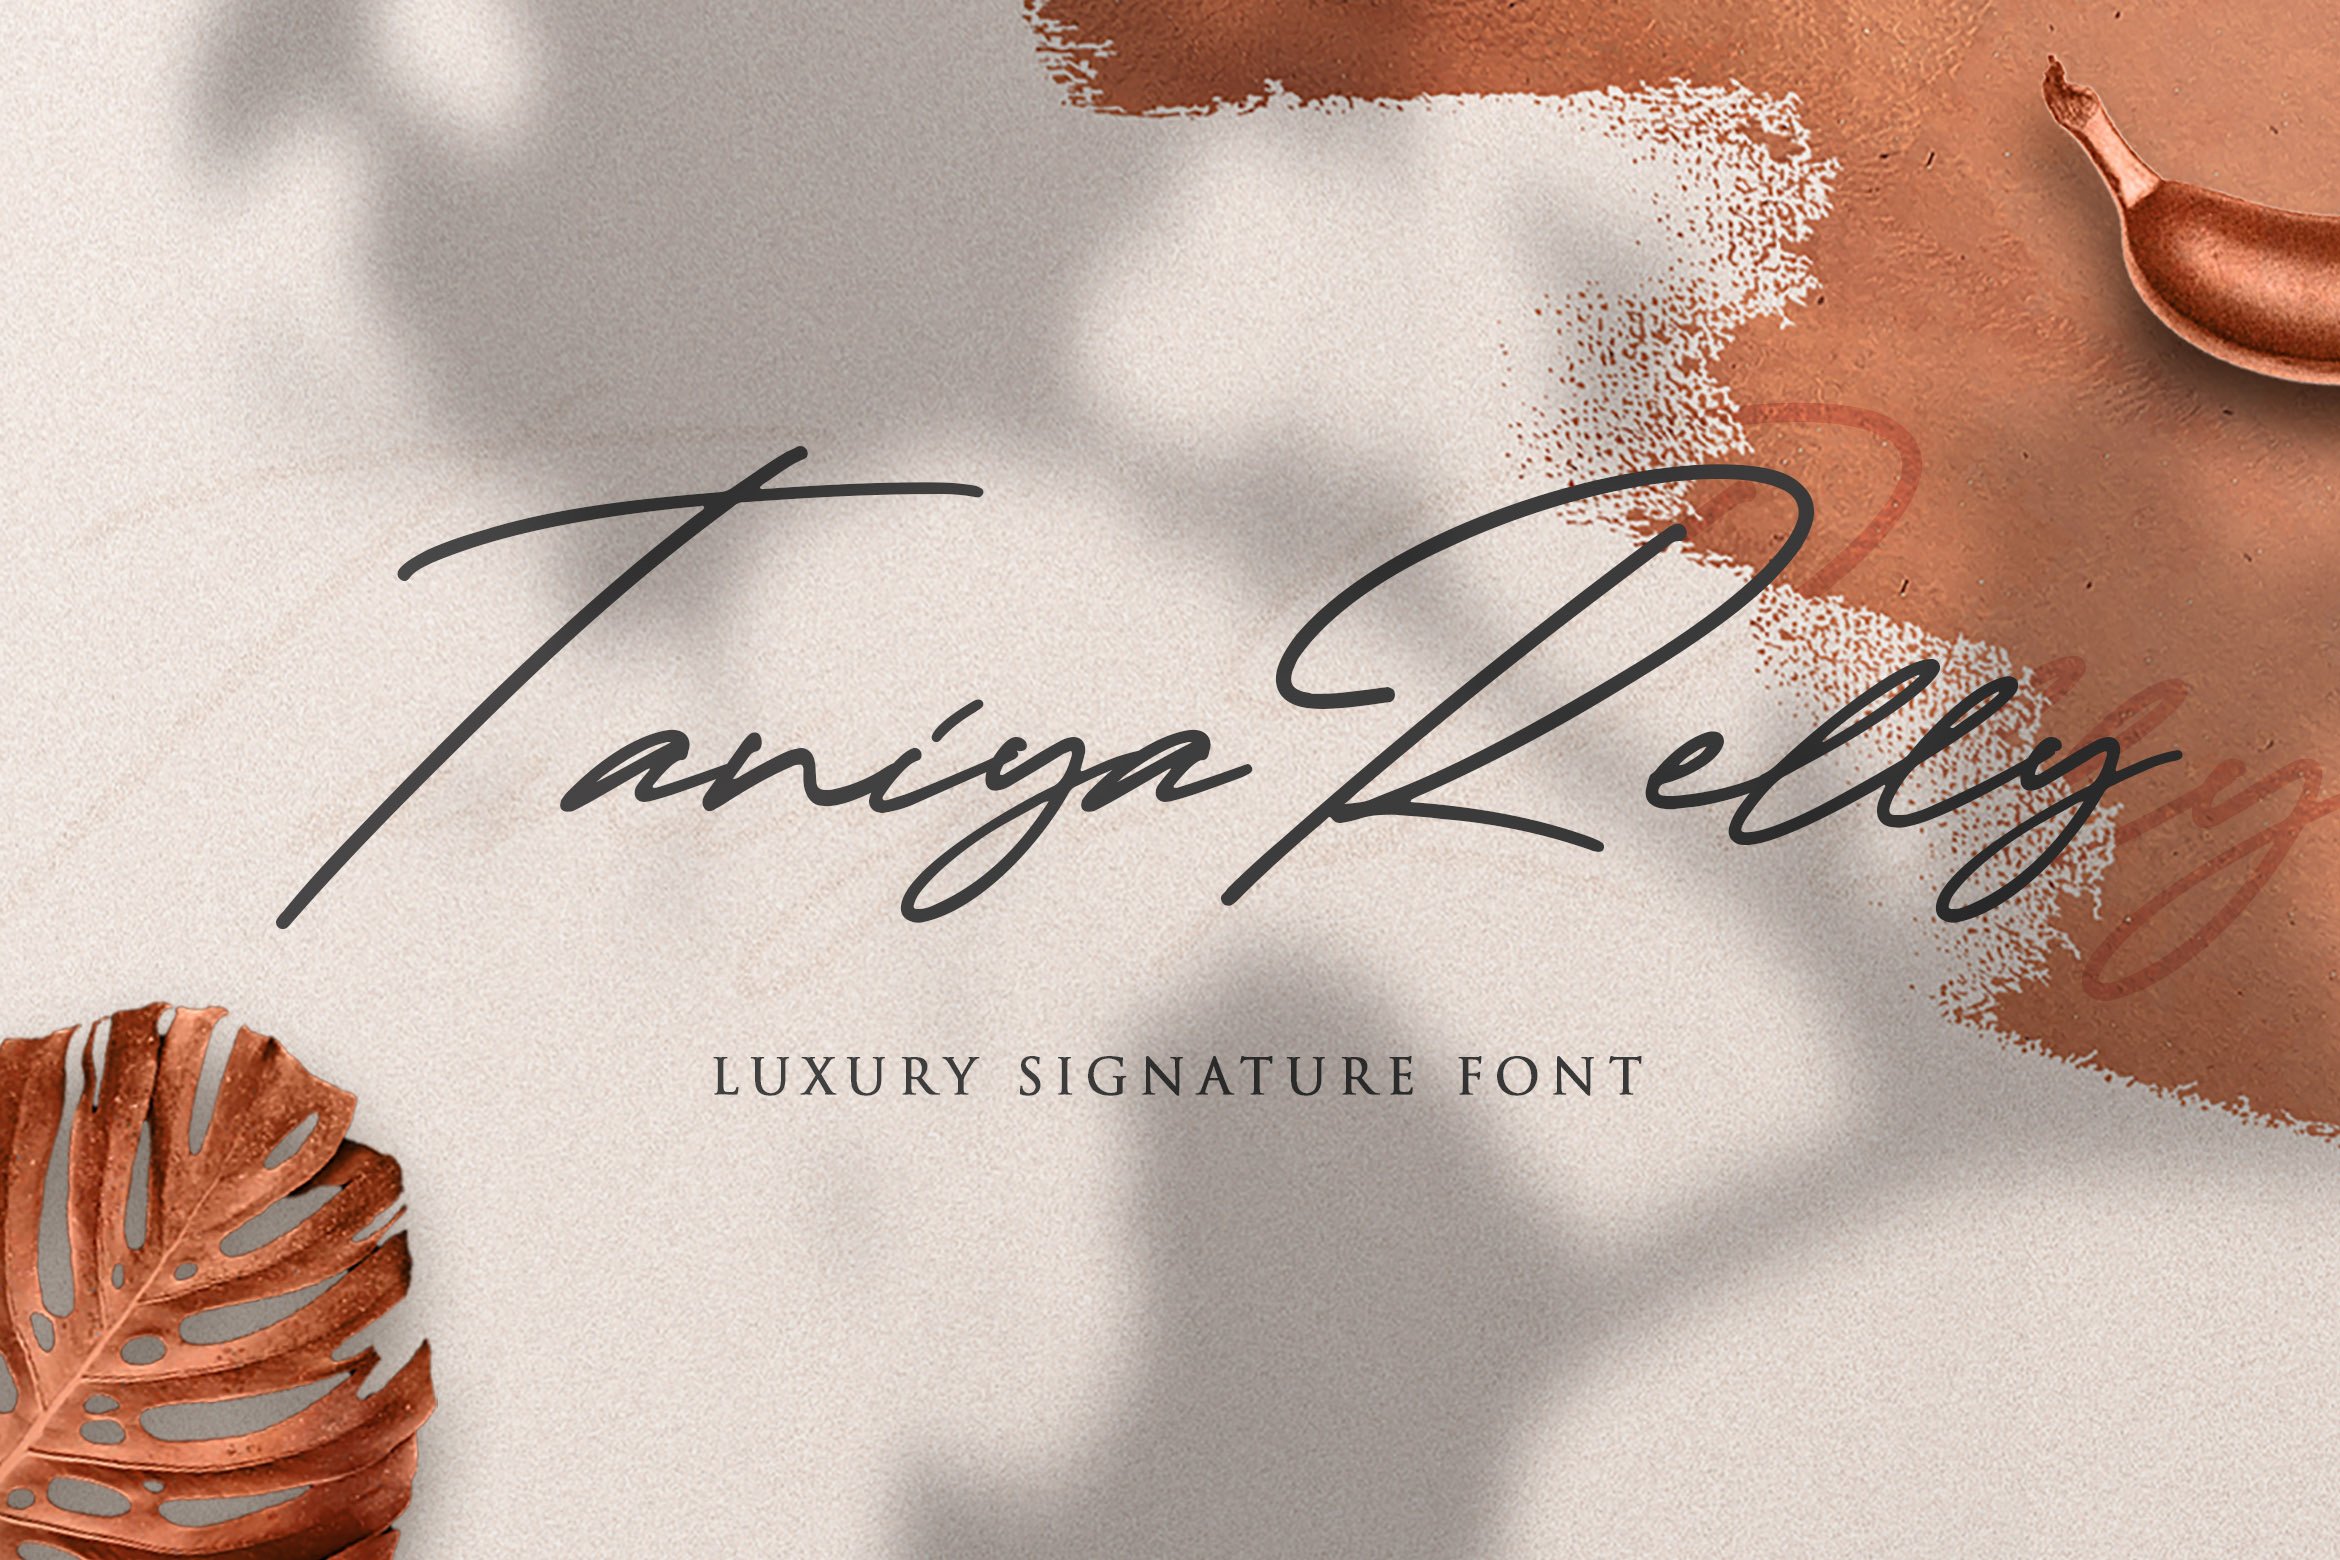 Taniya Relly - Luxury Signature Font cover image.